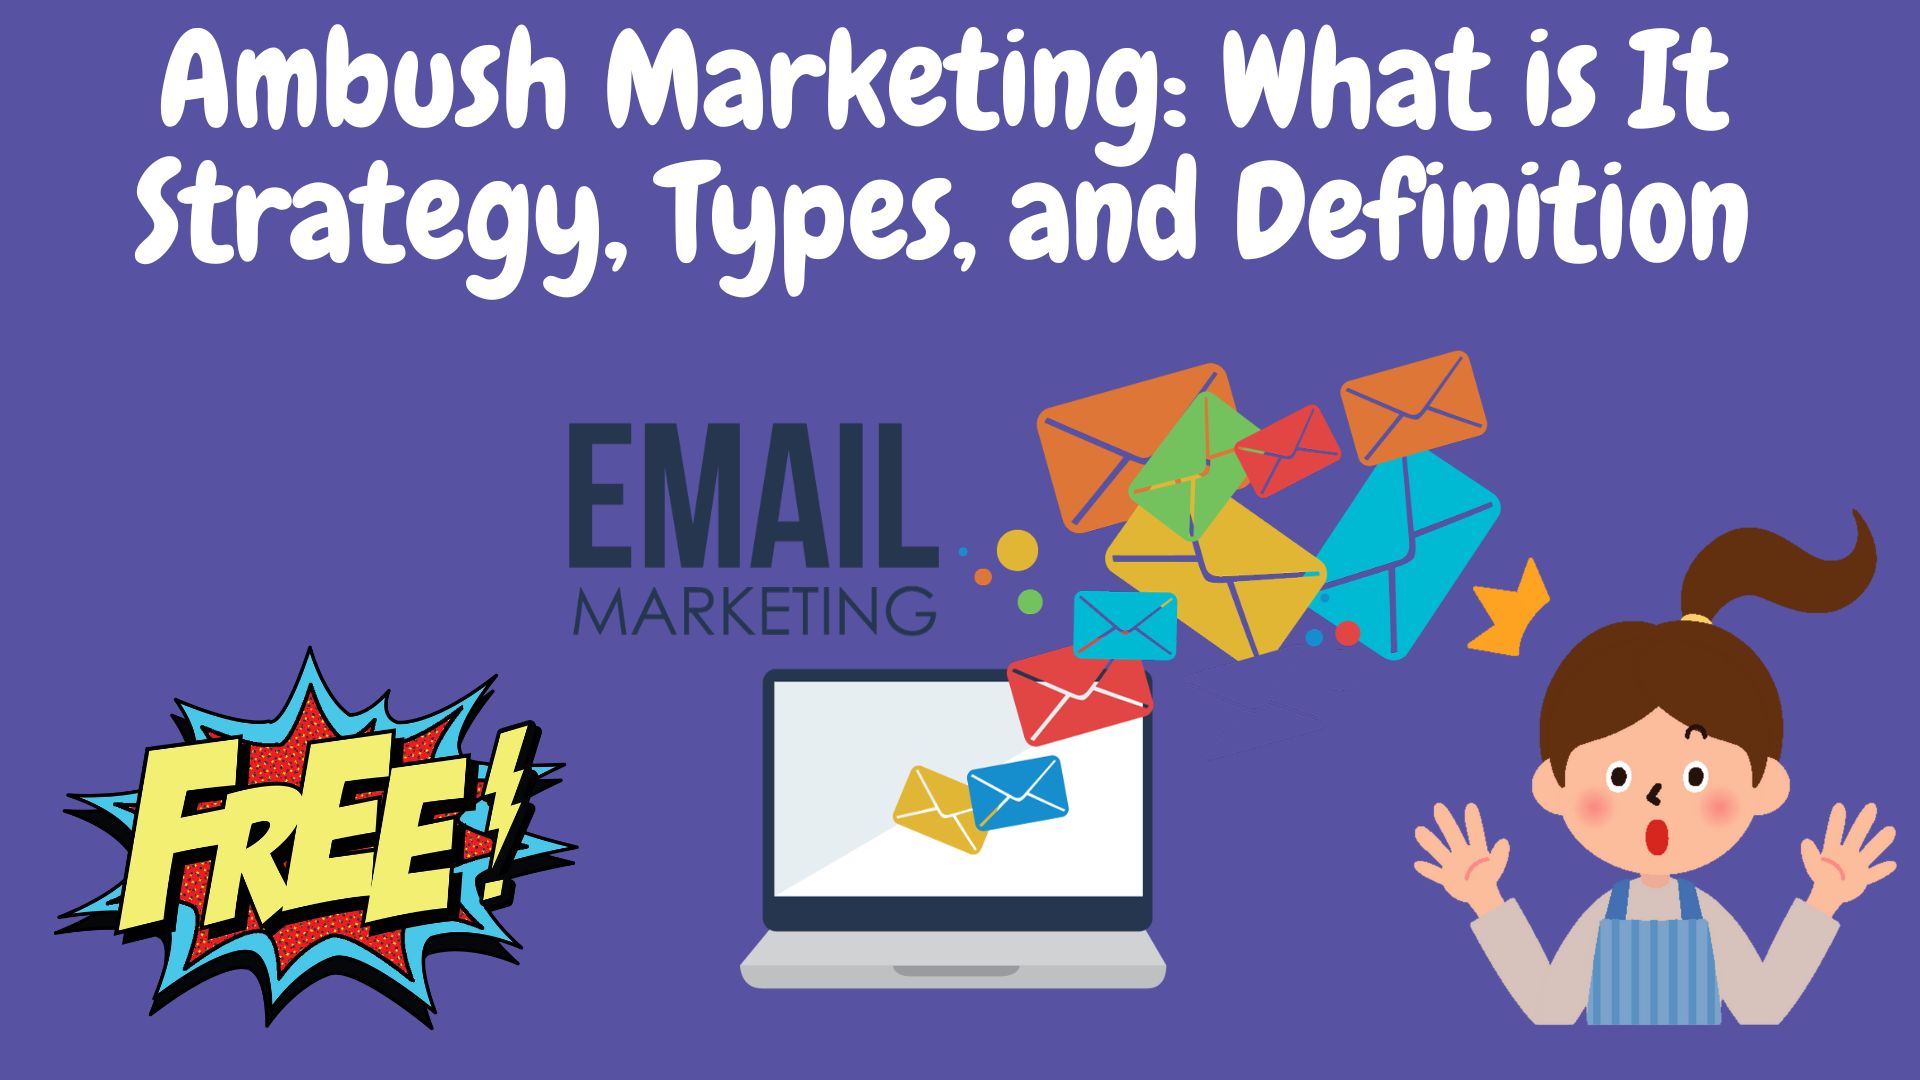 Ambush marketing: what is it strategy, types, and definition